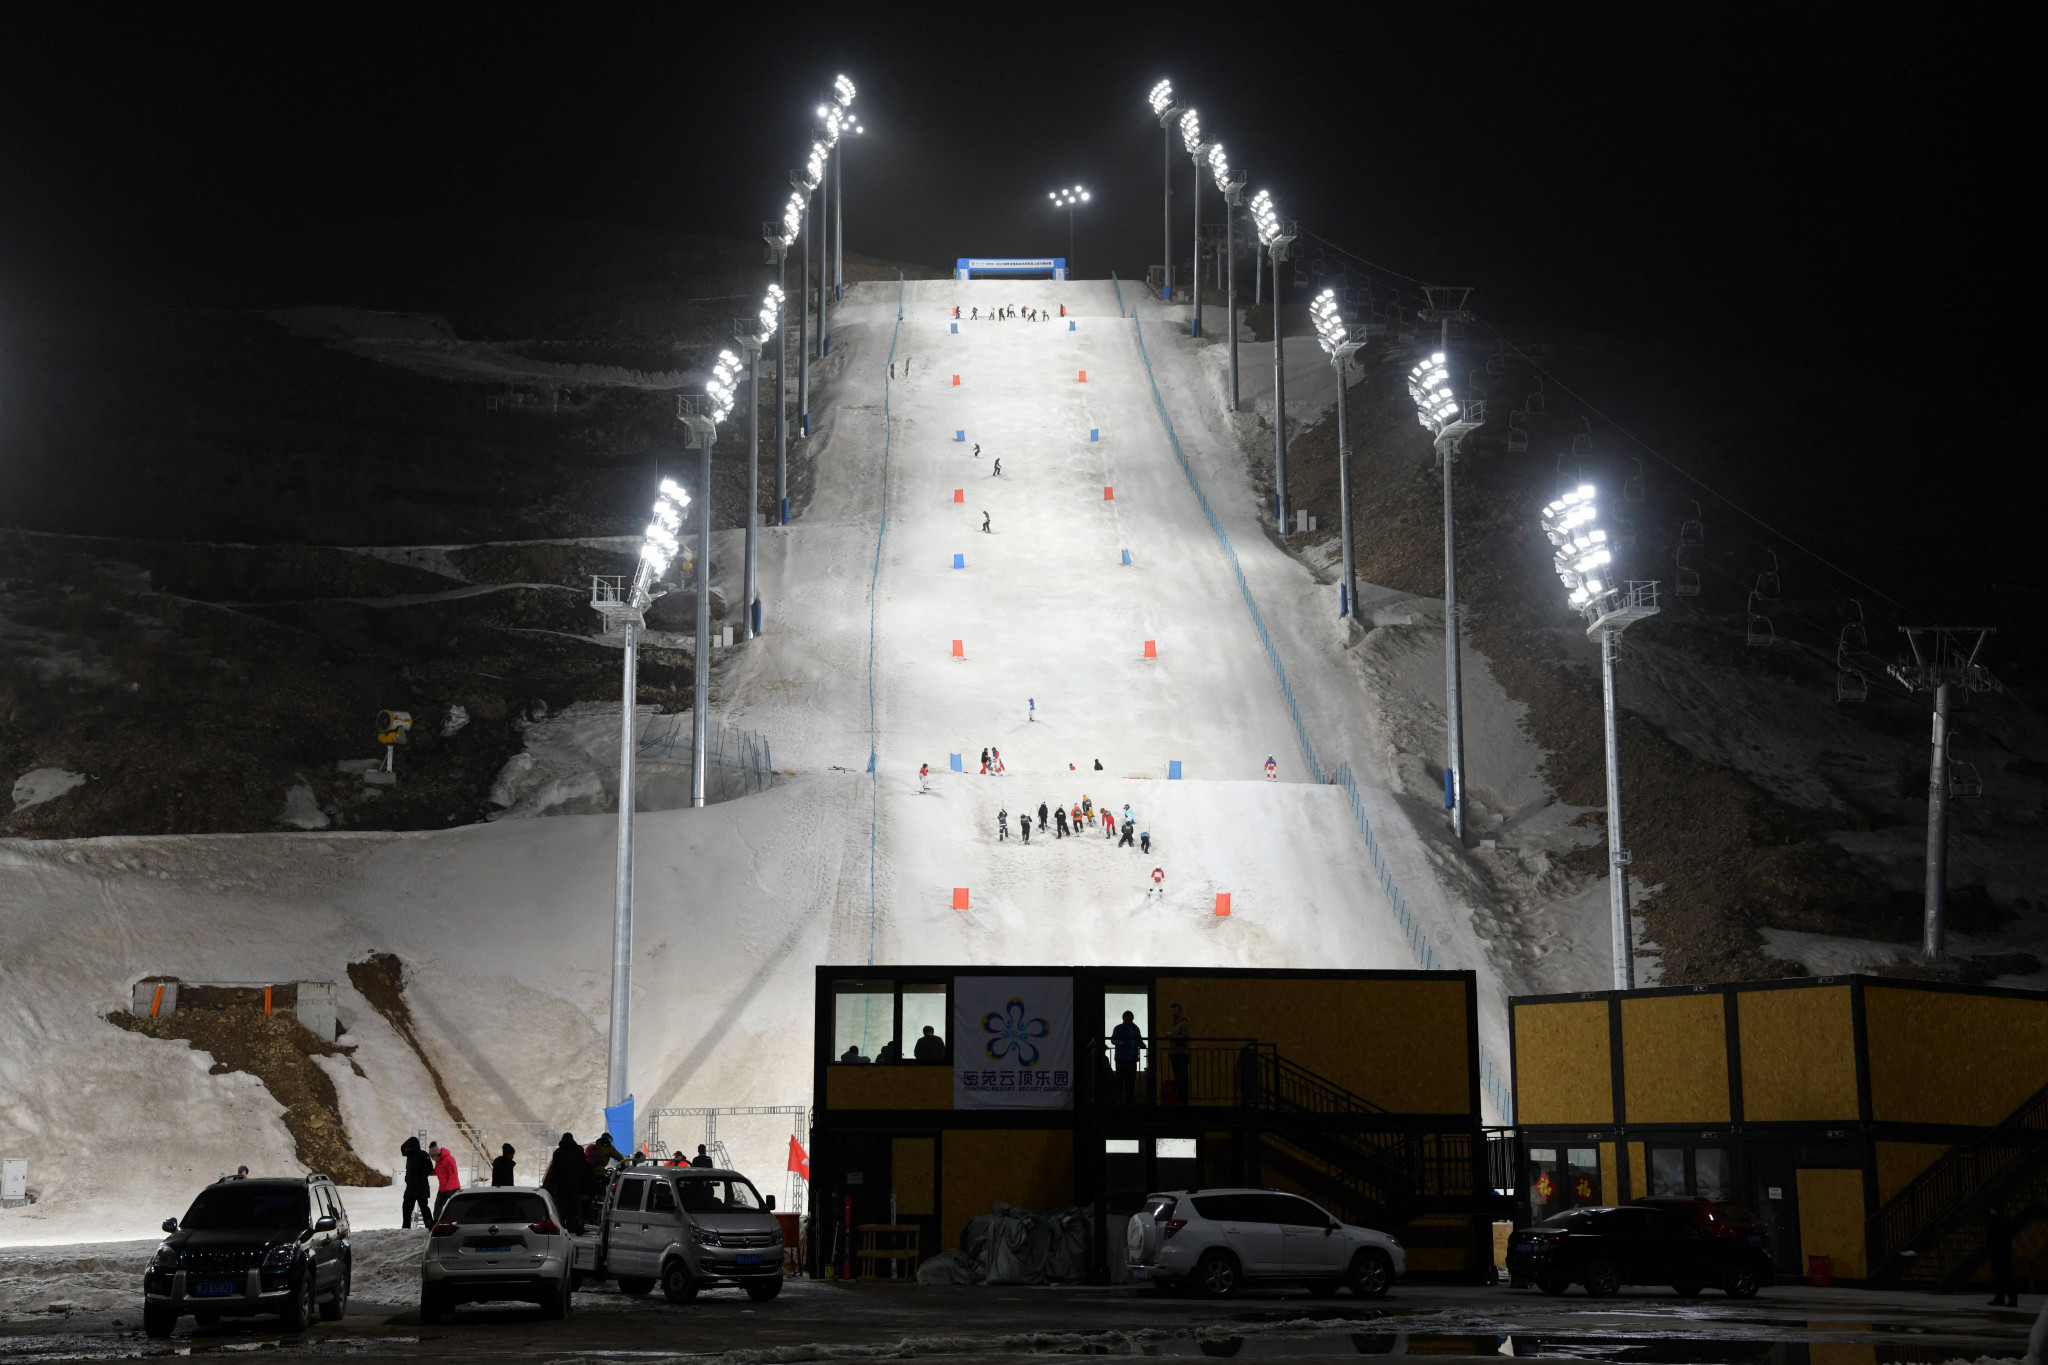 Two units of R-Zero's Arc technology will also be shipped so that they can be used when the US team arrives at the Beijing 2022 Winter Olympic Games ©Getty Images